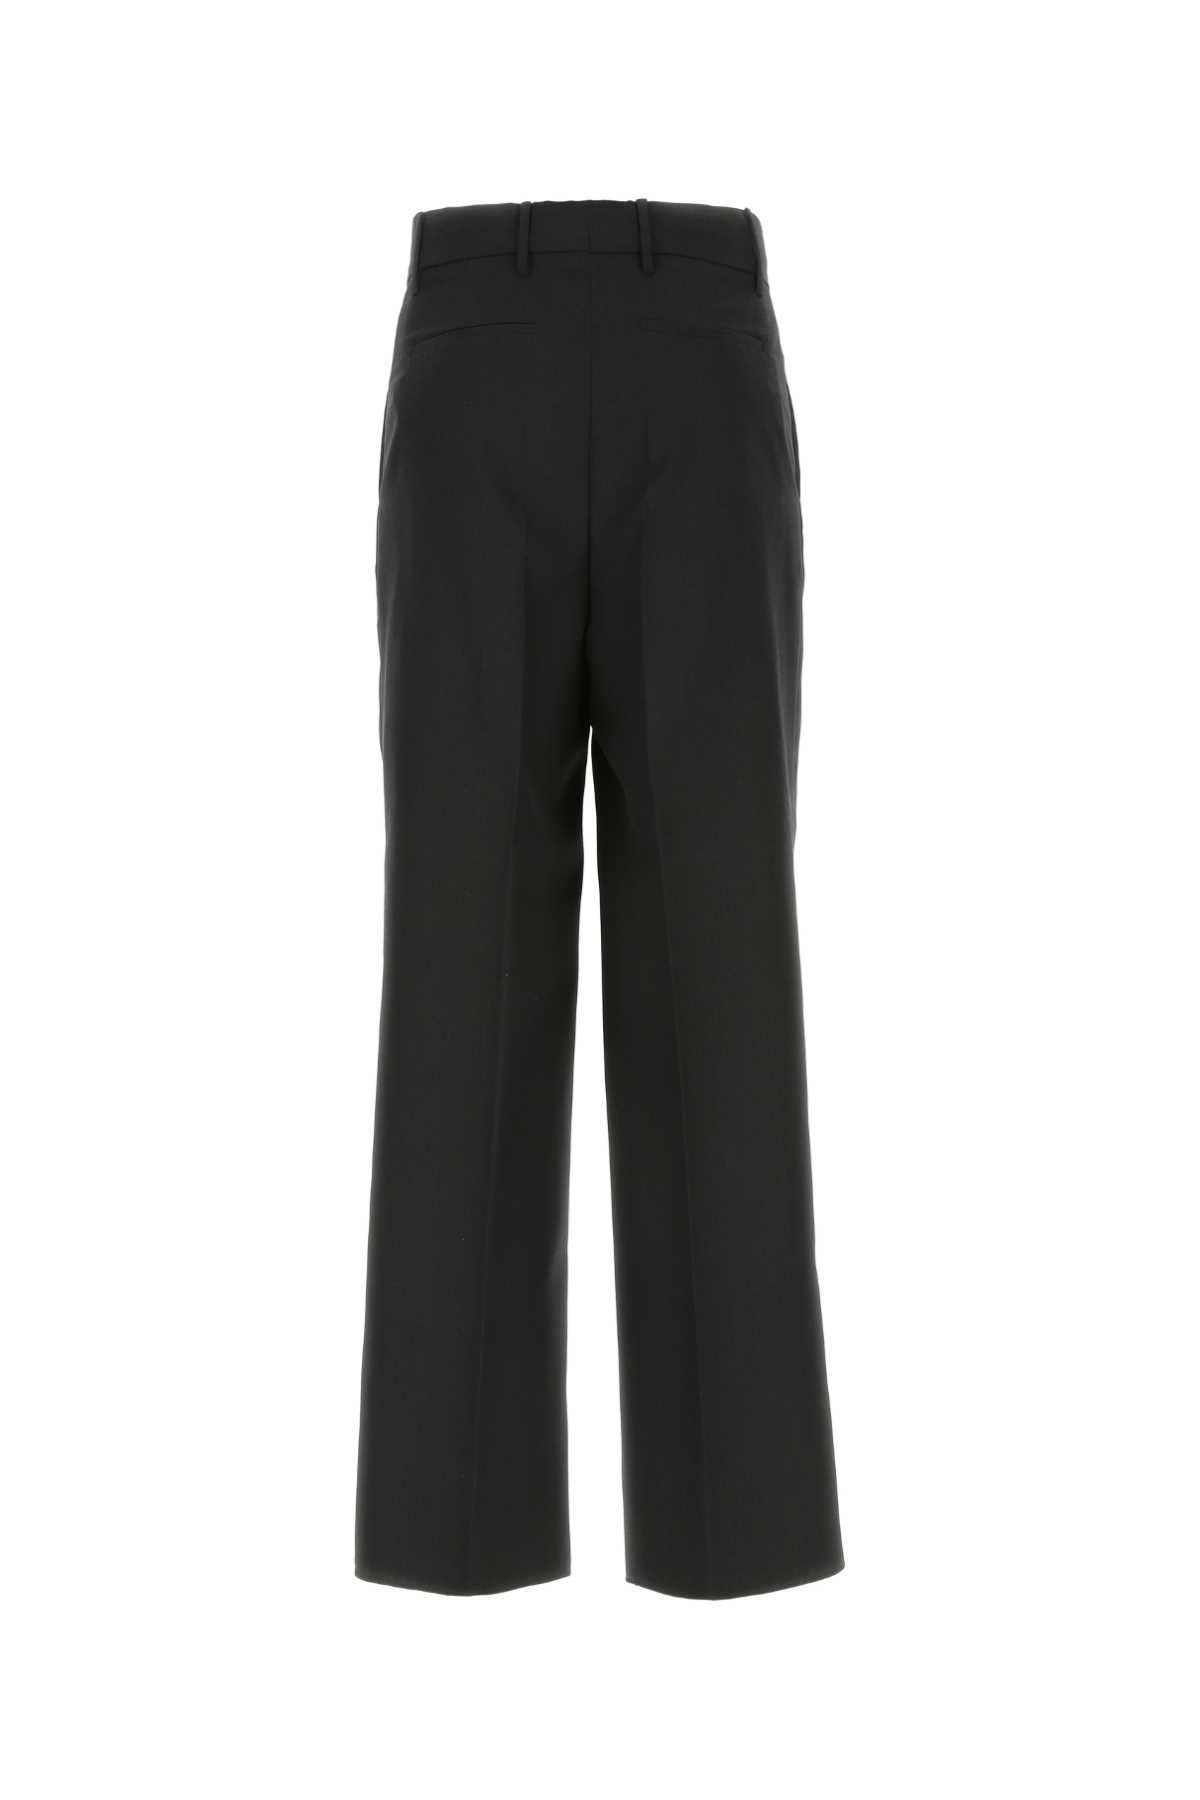 Givenchy Black Wool Pant In 025